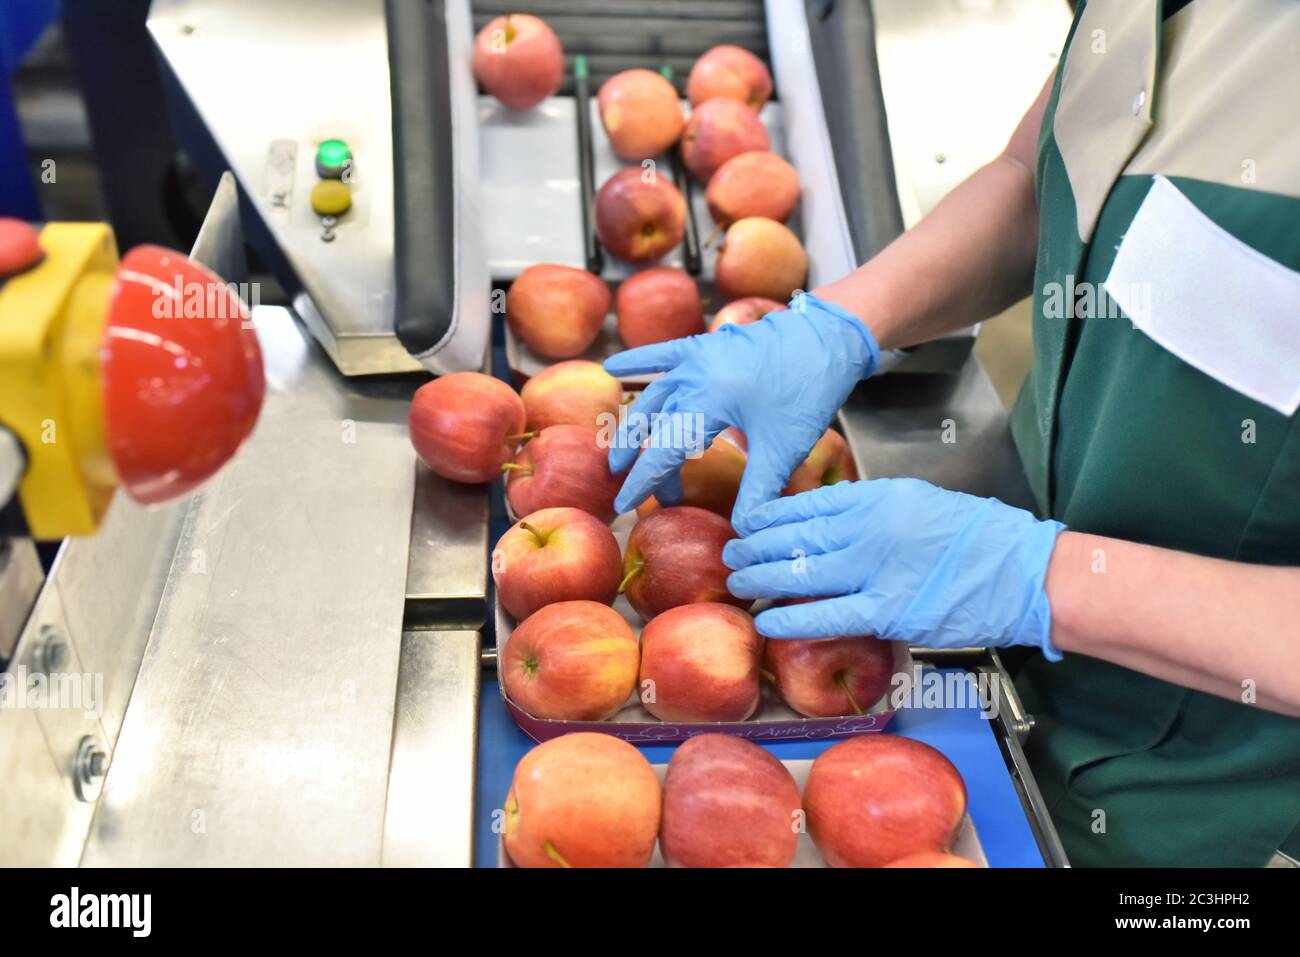 food factory: assembly line with apples and workers Stock Photo